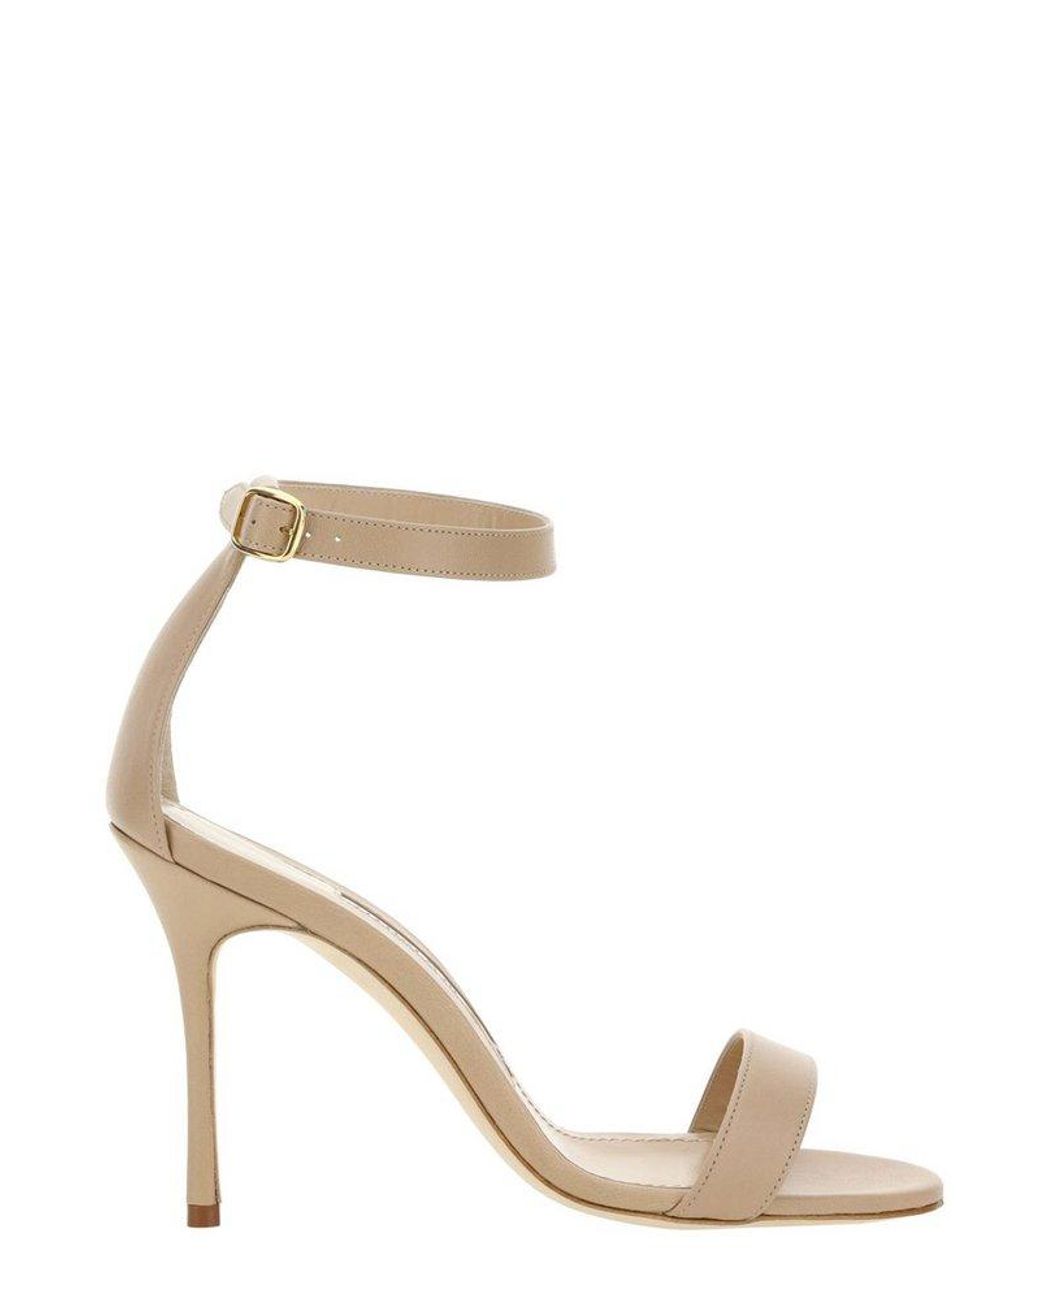 Manolo Blahnik Chaos Strappy Heeled Sandals in Natural | Lyst